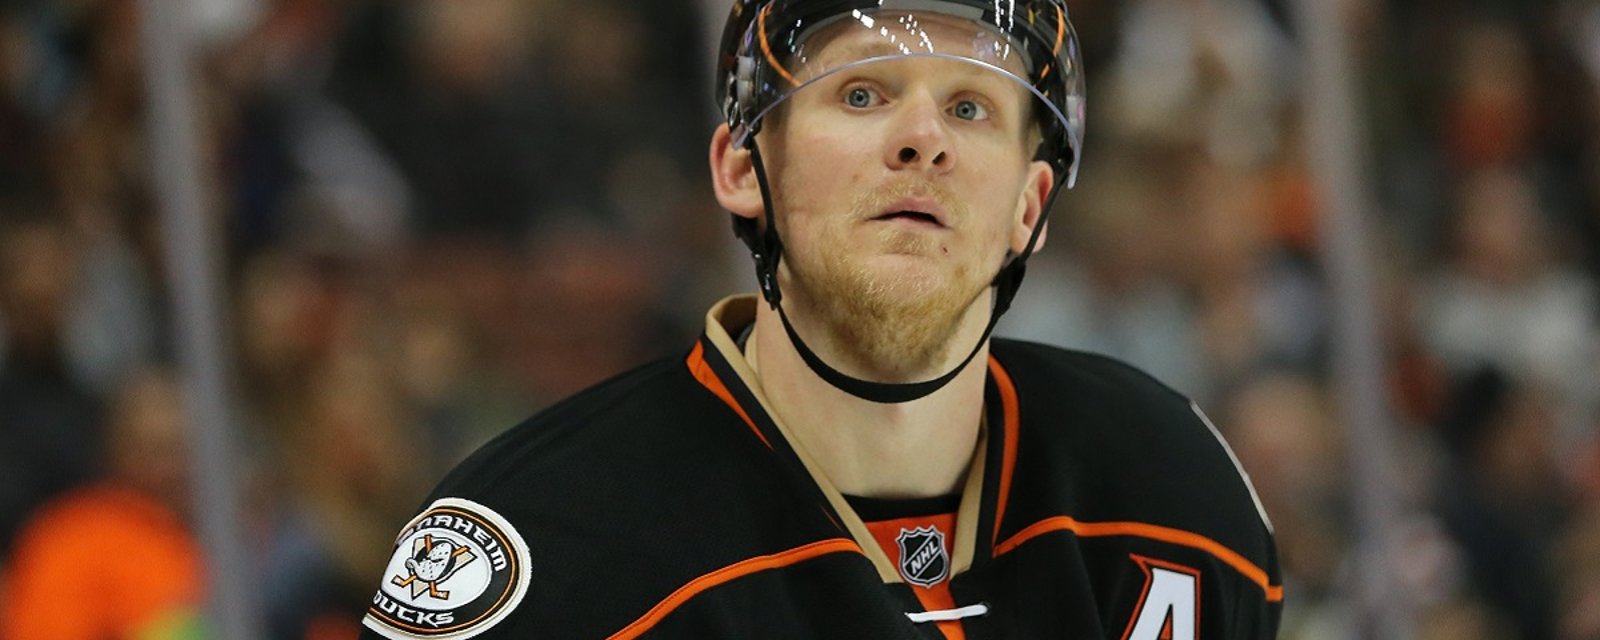 Breaking: Corey Perry has agreed to brand new deal.